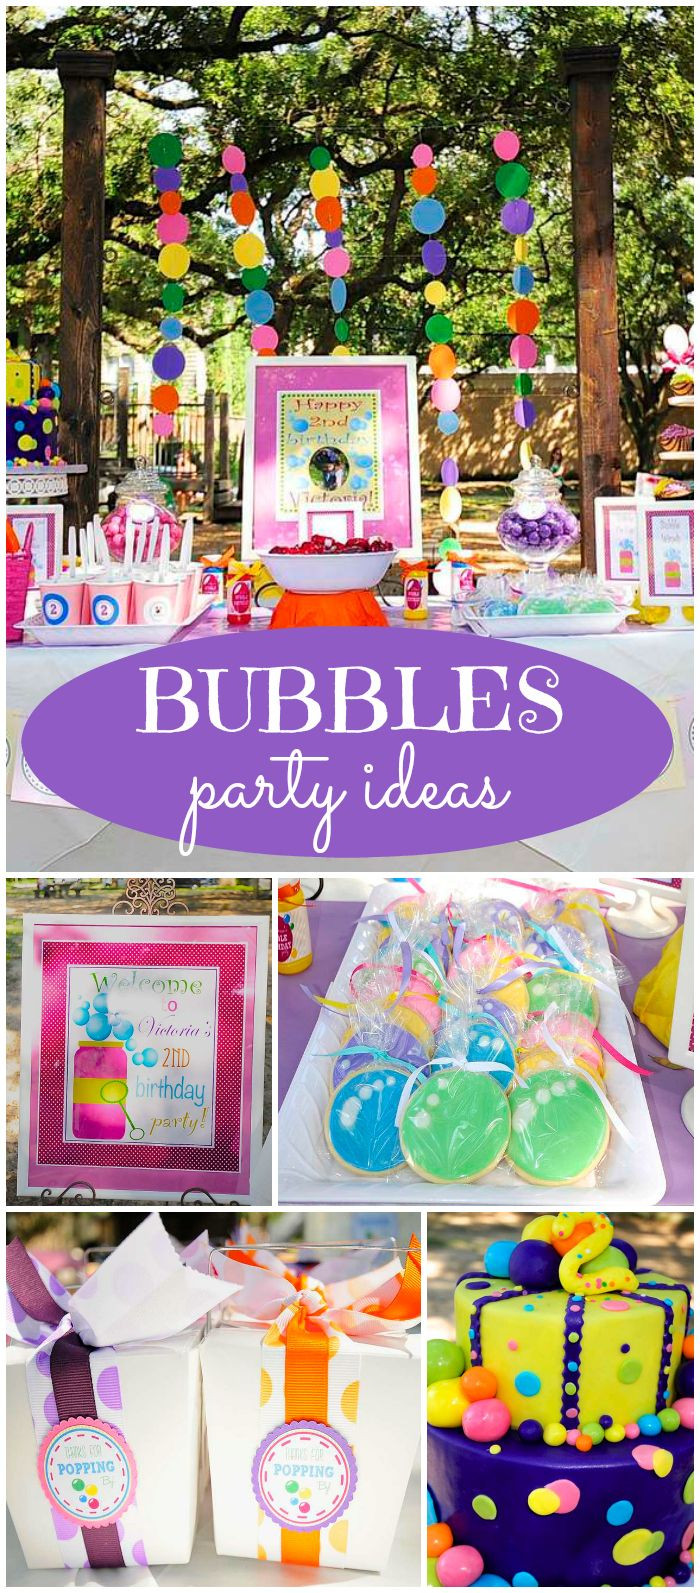 Ideas For Toddler Birthday Party
 Bubbles Birthday "Victoria s Bubbles Themed 2nd birthday